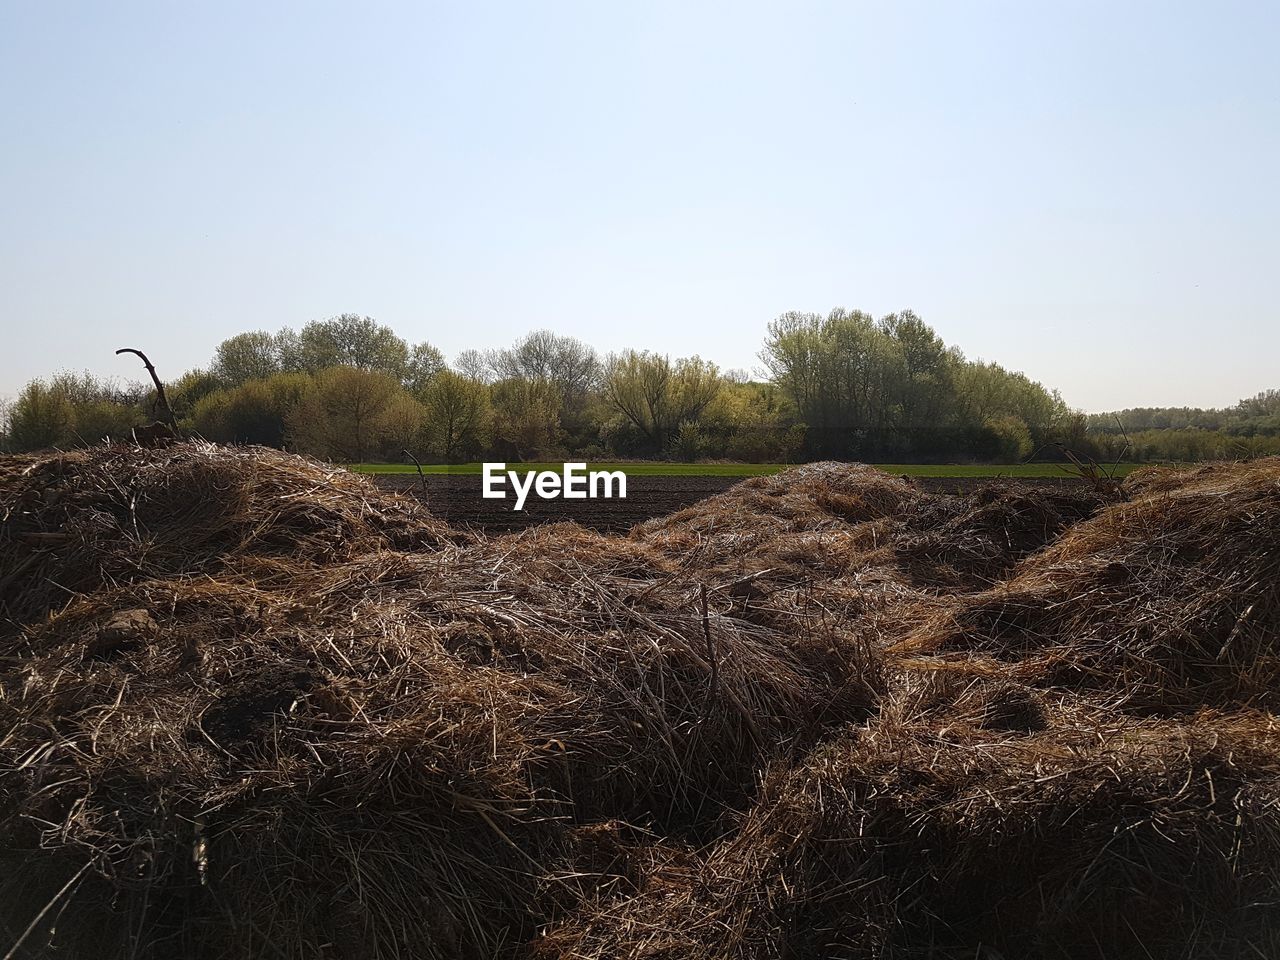 STACK OF HAY BALES ON FIELD AGAINST CLEAR SKY